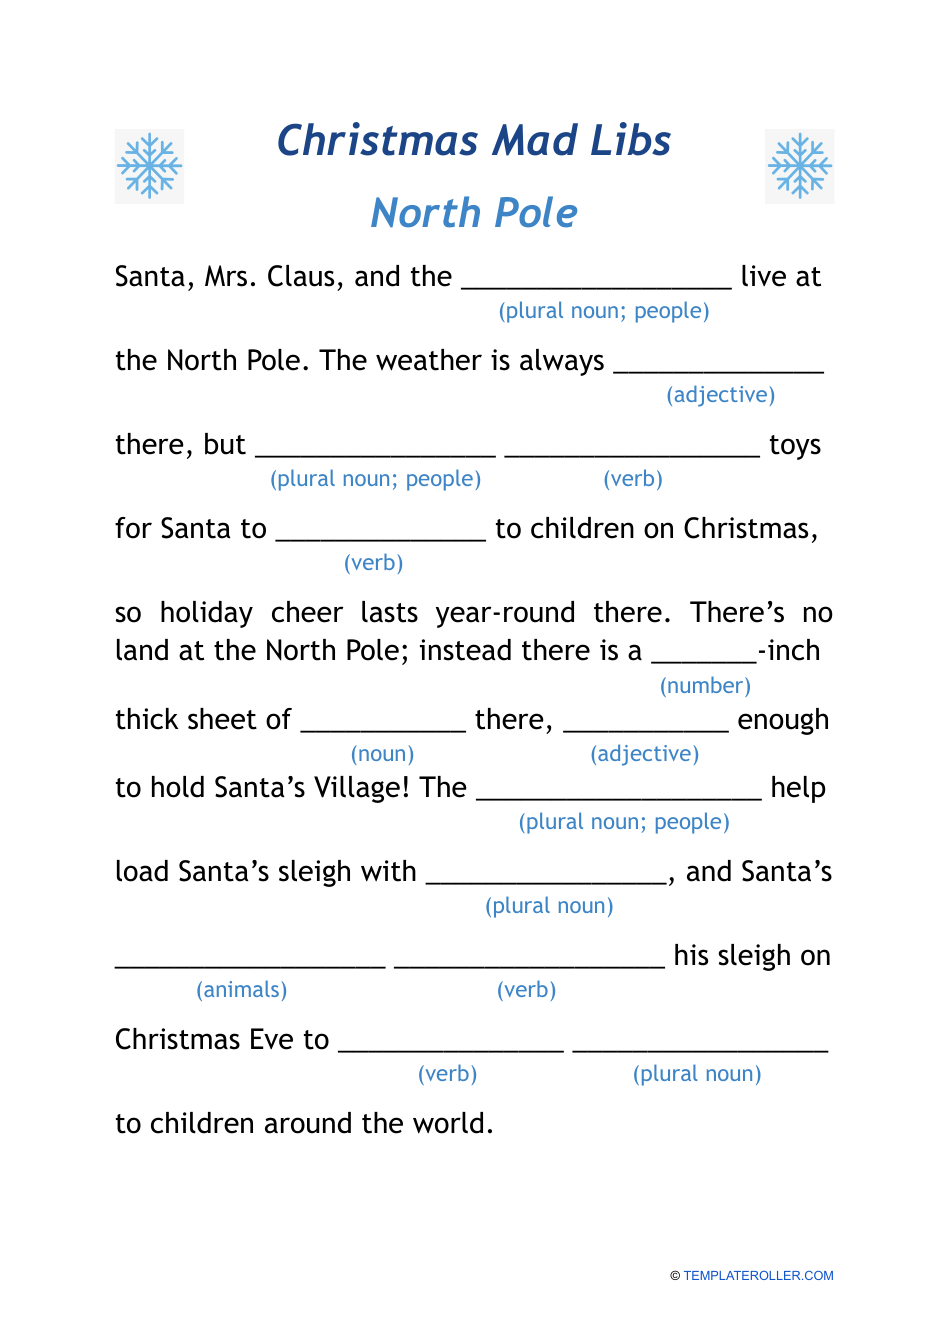 Christmas Mad Libs - North Pole Image Preview